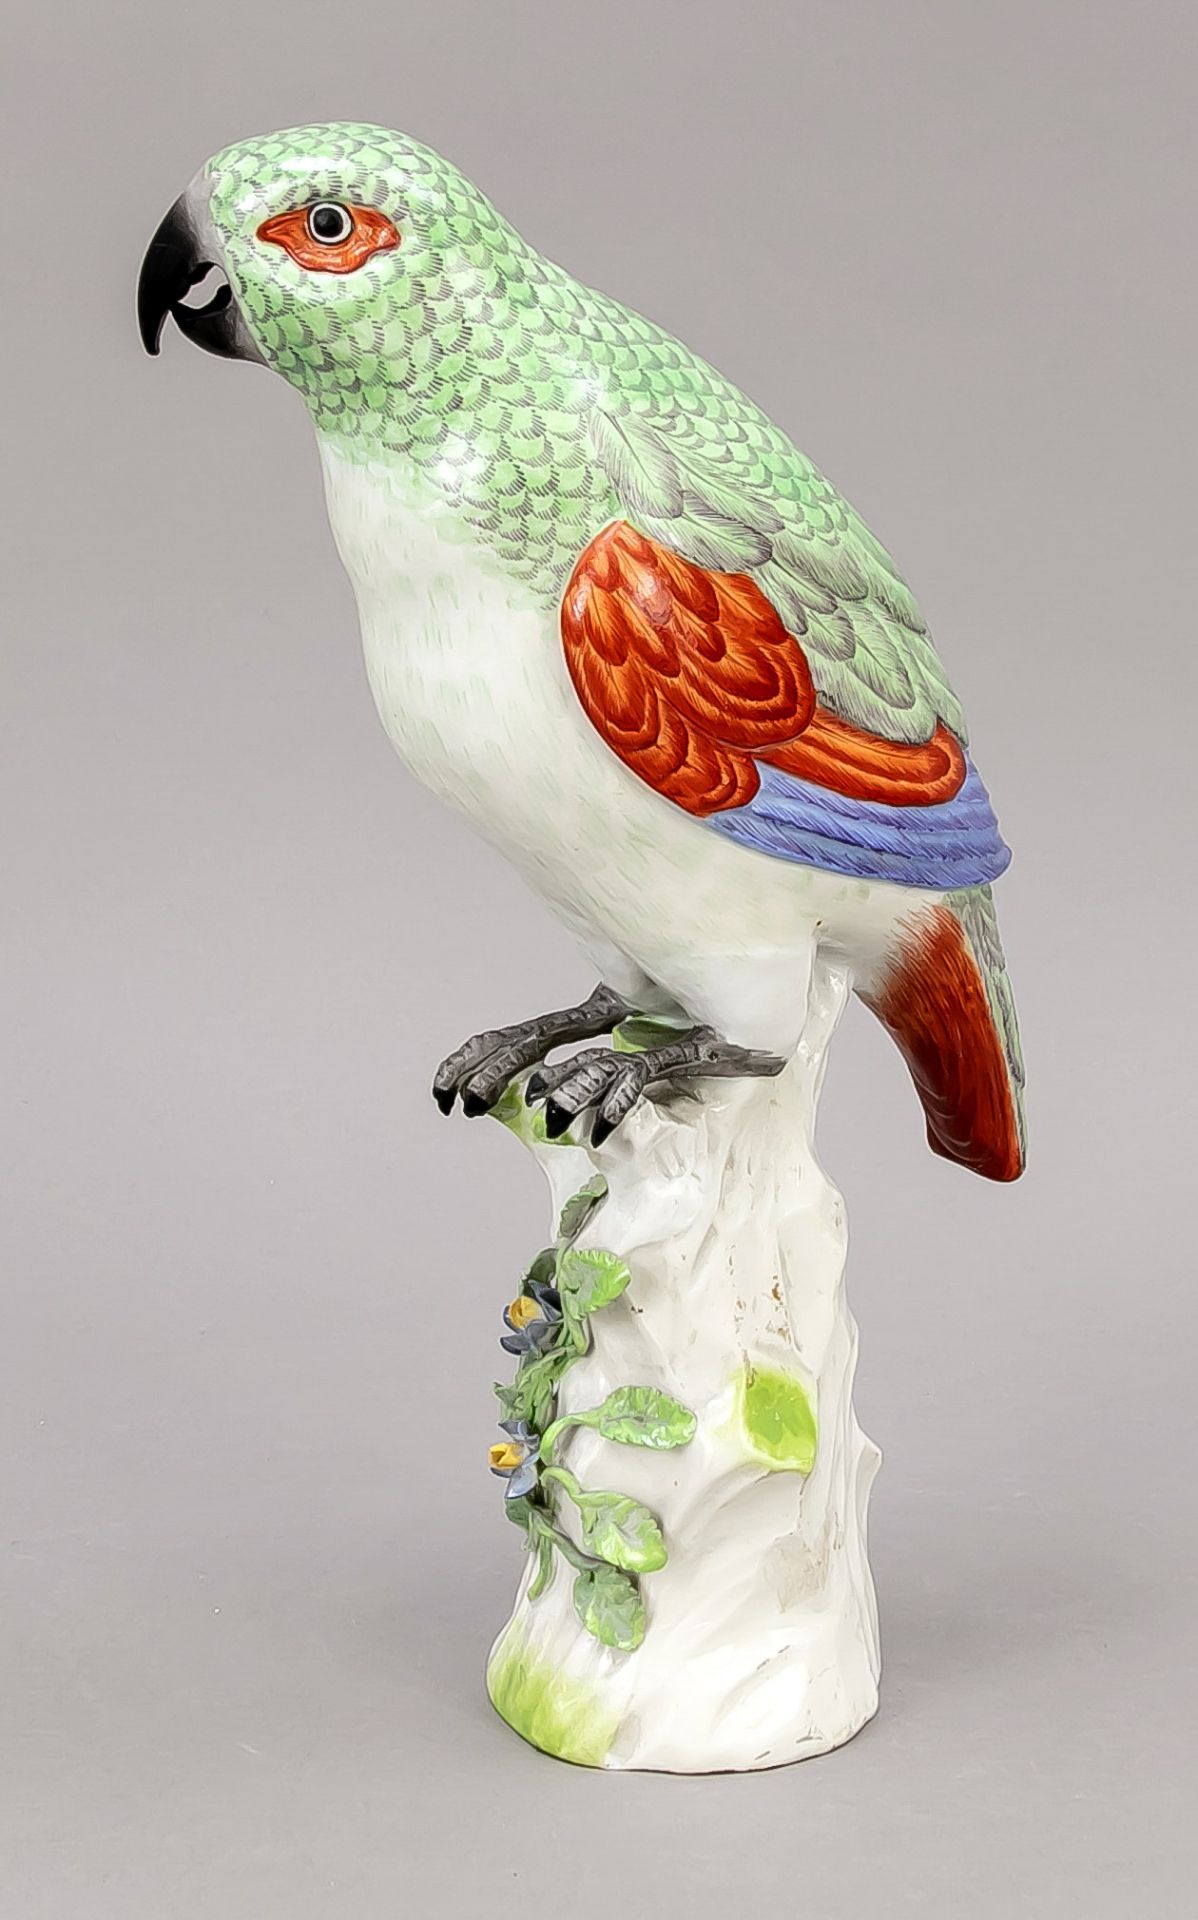 Parrot on a tree stump, Scheibe-Alsbach, Thuringia, 20th century, attached flowers on the tree - Image 2 of 3